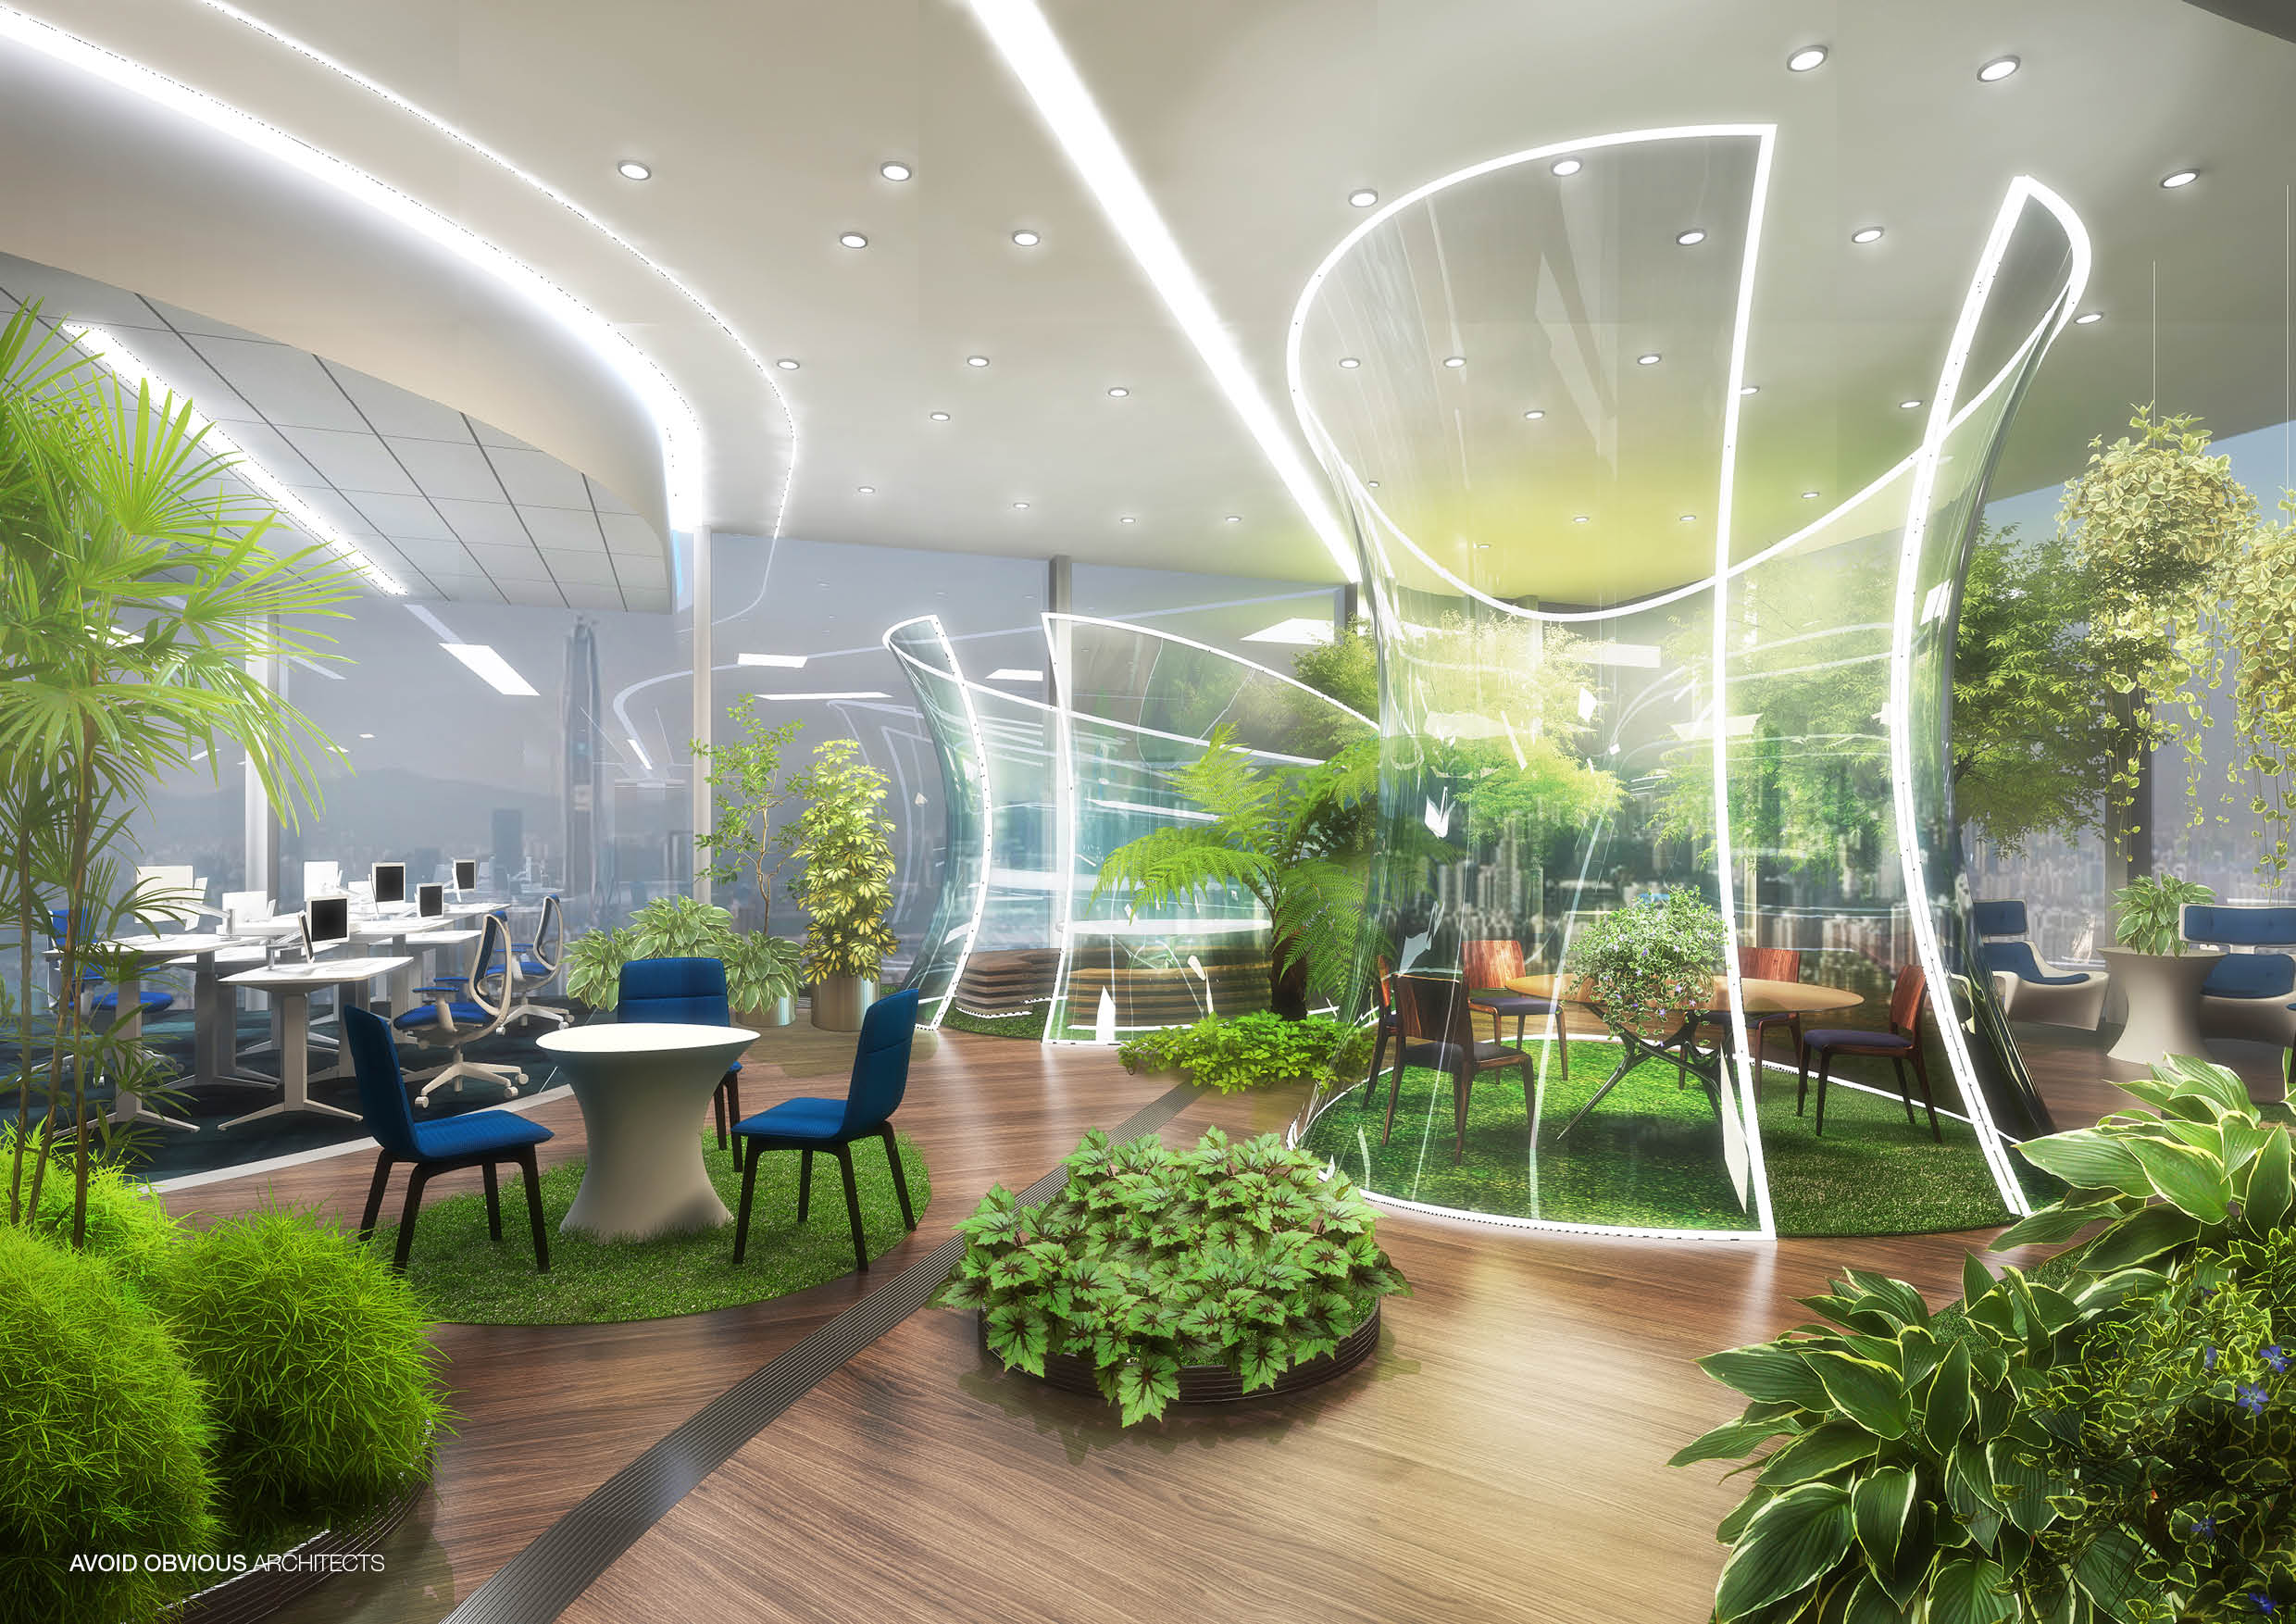 Office, Sustainable, customizable, flexible, workplace, future, architecture, interior, design, green, plants, indoors, avoid obvious, aoa, aoarchitect, aviation, air, flying, airline, lobby, exhibition, 2020, garden, fly